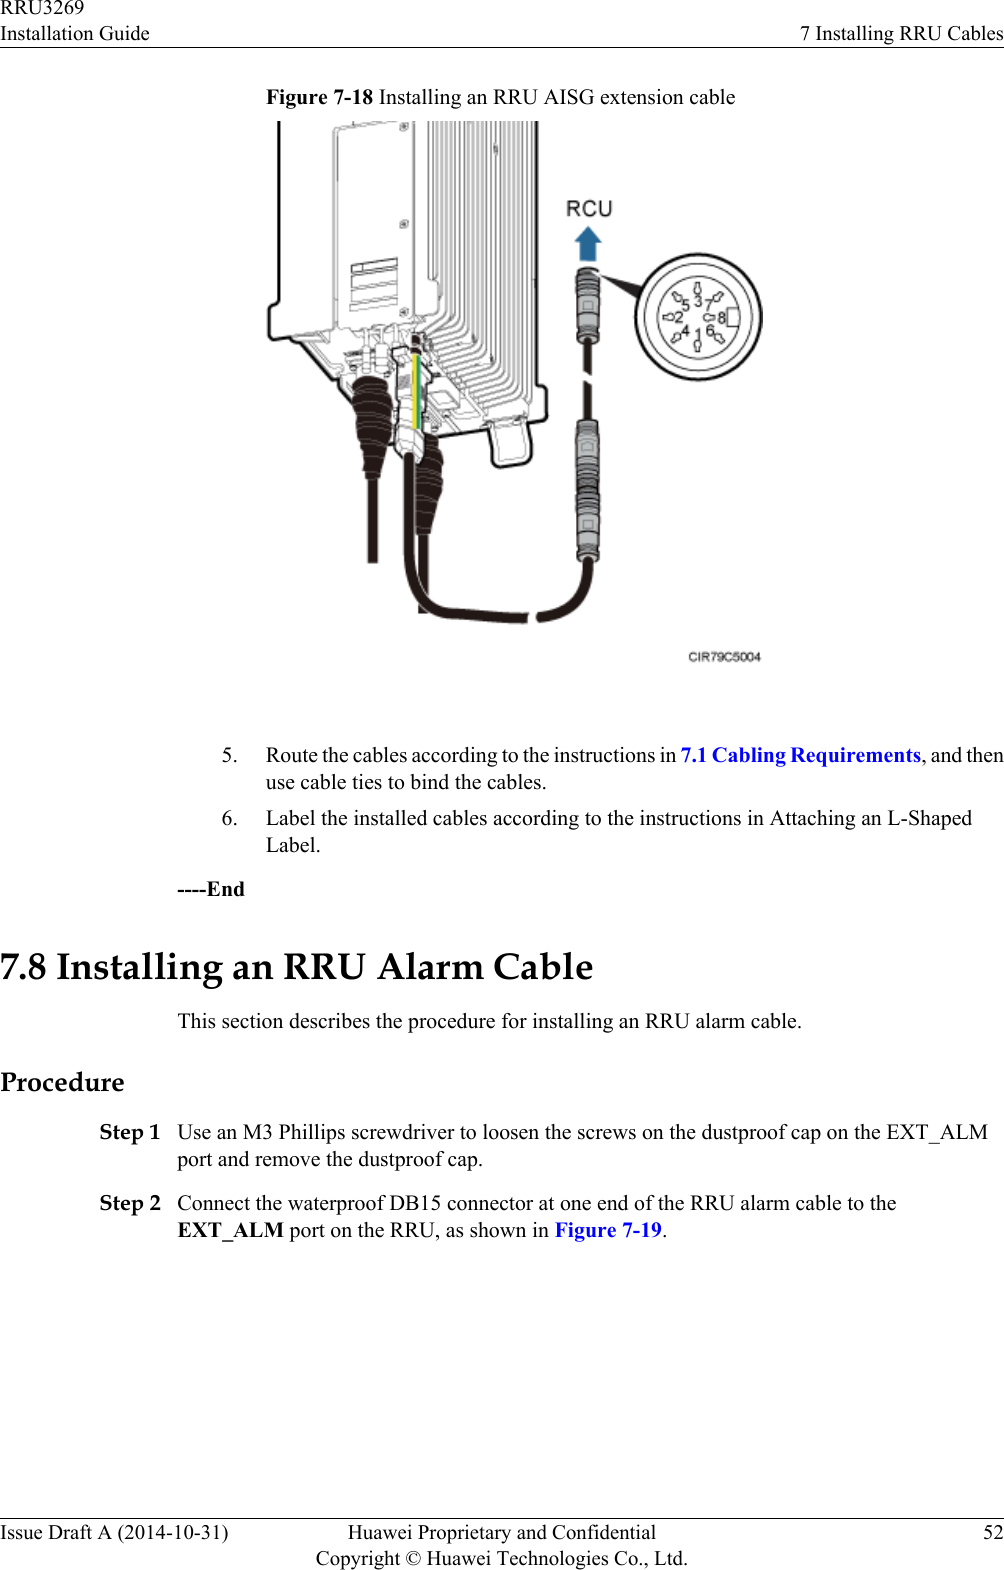 Figure 7-18 Installing an RRU AISG extension cable 5. Route the cables according to the instructions in 7.1 Cabling Requirements, and thenuse cable ties to bind the cables.6. Label the installed cables according to the instructions in Attaching an L-ShapedLabel.----End7.8 Installing an RRU Alarm CableThis section describes the procedure for installing an RRU alarm cable.ProcedureStep 1 Use an M3 Phillips screwdriver to loosen the screws on the dustproof cap on the EXT_ALMport and remove the dustproof cap.Step 2 Connect the waterproof DB15 connector at one end of the RRU alarm cable to theEXT_ALM port on the RRU, as shown in Figure 7-19.RRU3269Installation Guide 7 Installing RRU CablesIssue Draft A (2014-10-31) Huawei Proprietary and ConfidentialCopyright © Huawei Technologies Co., Ltd.52